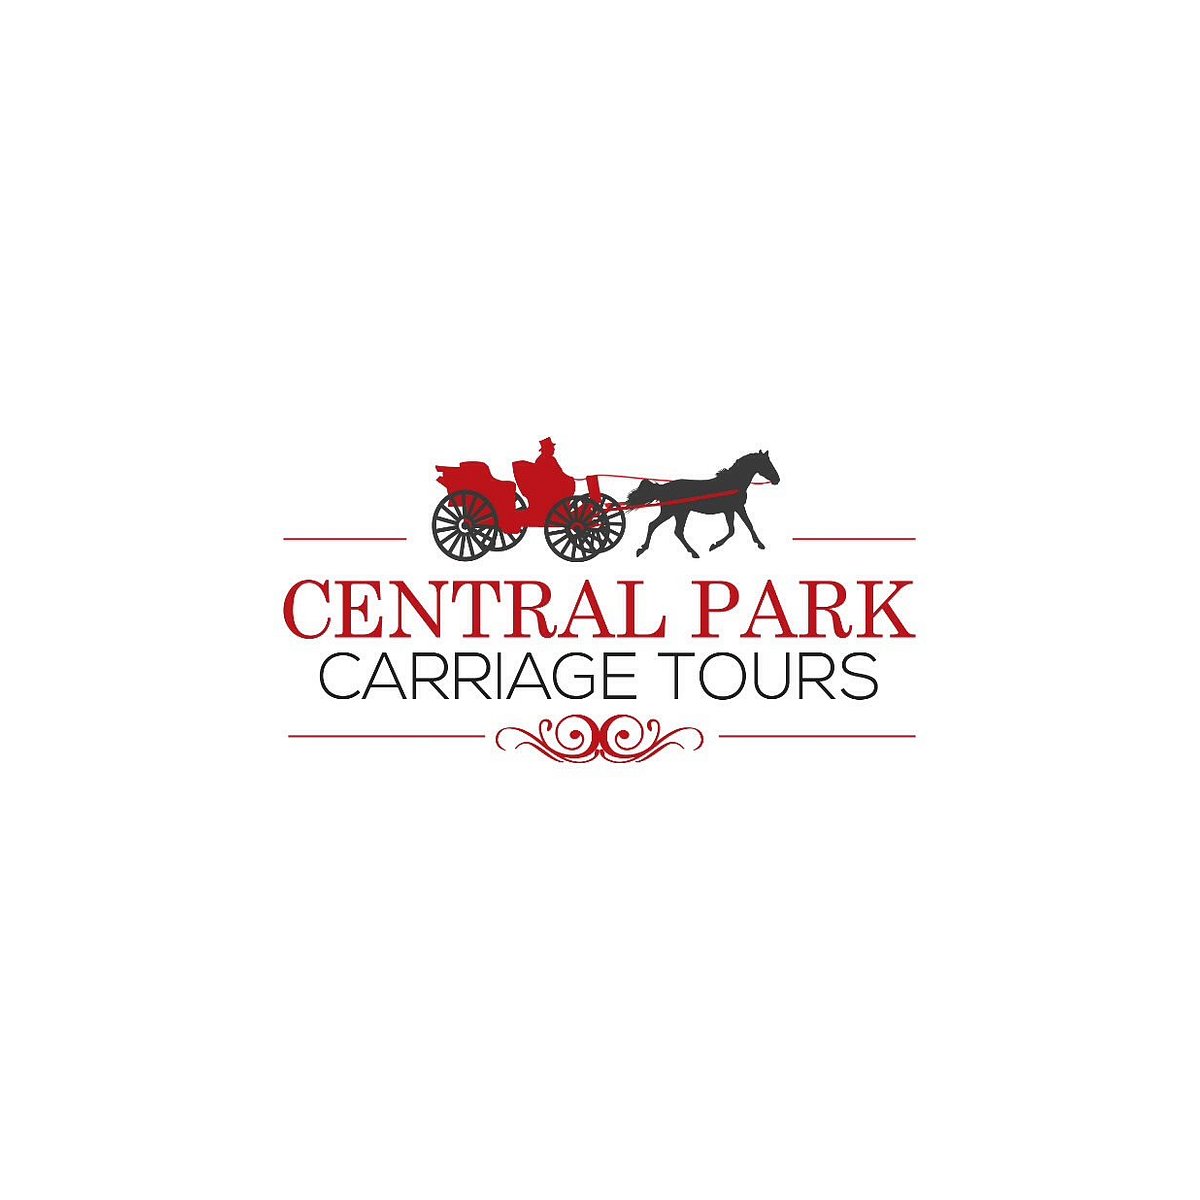 Central Park Carriage Tours (New York City) - All You Need to Know ...